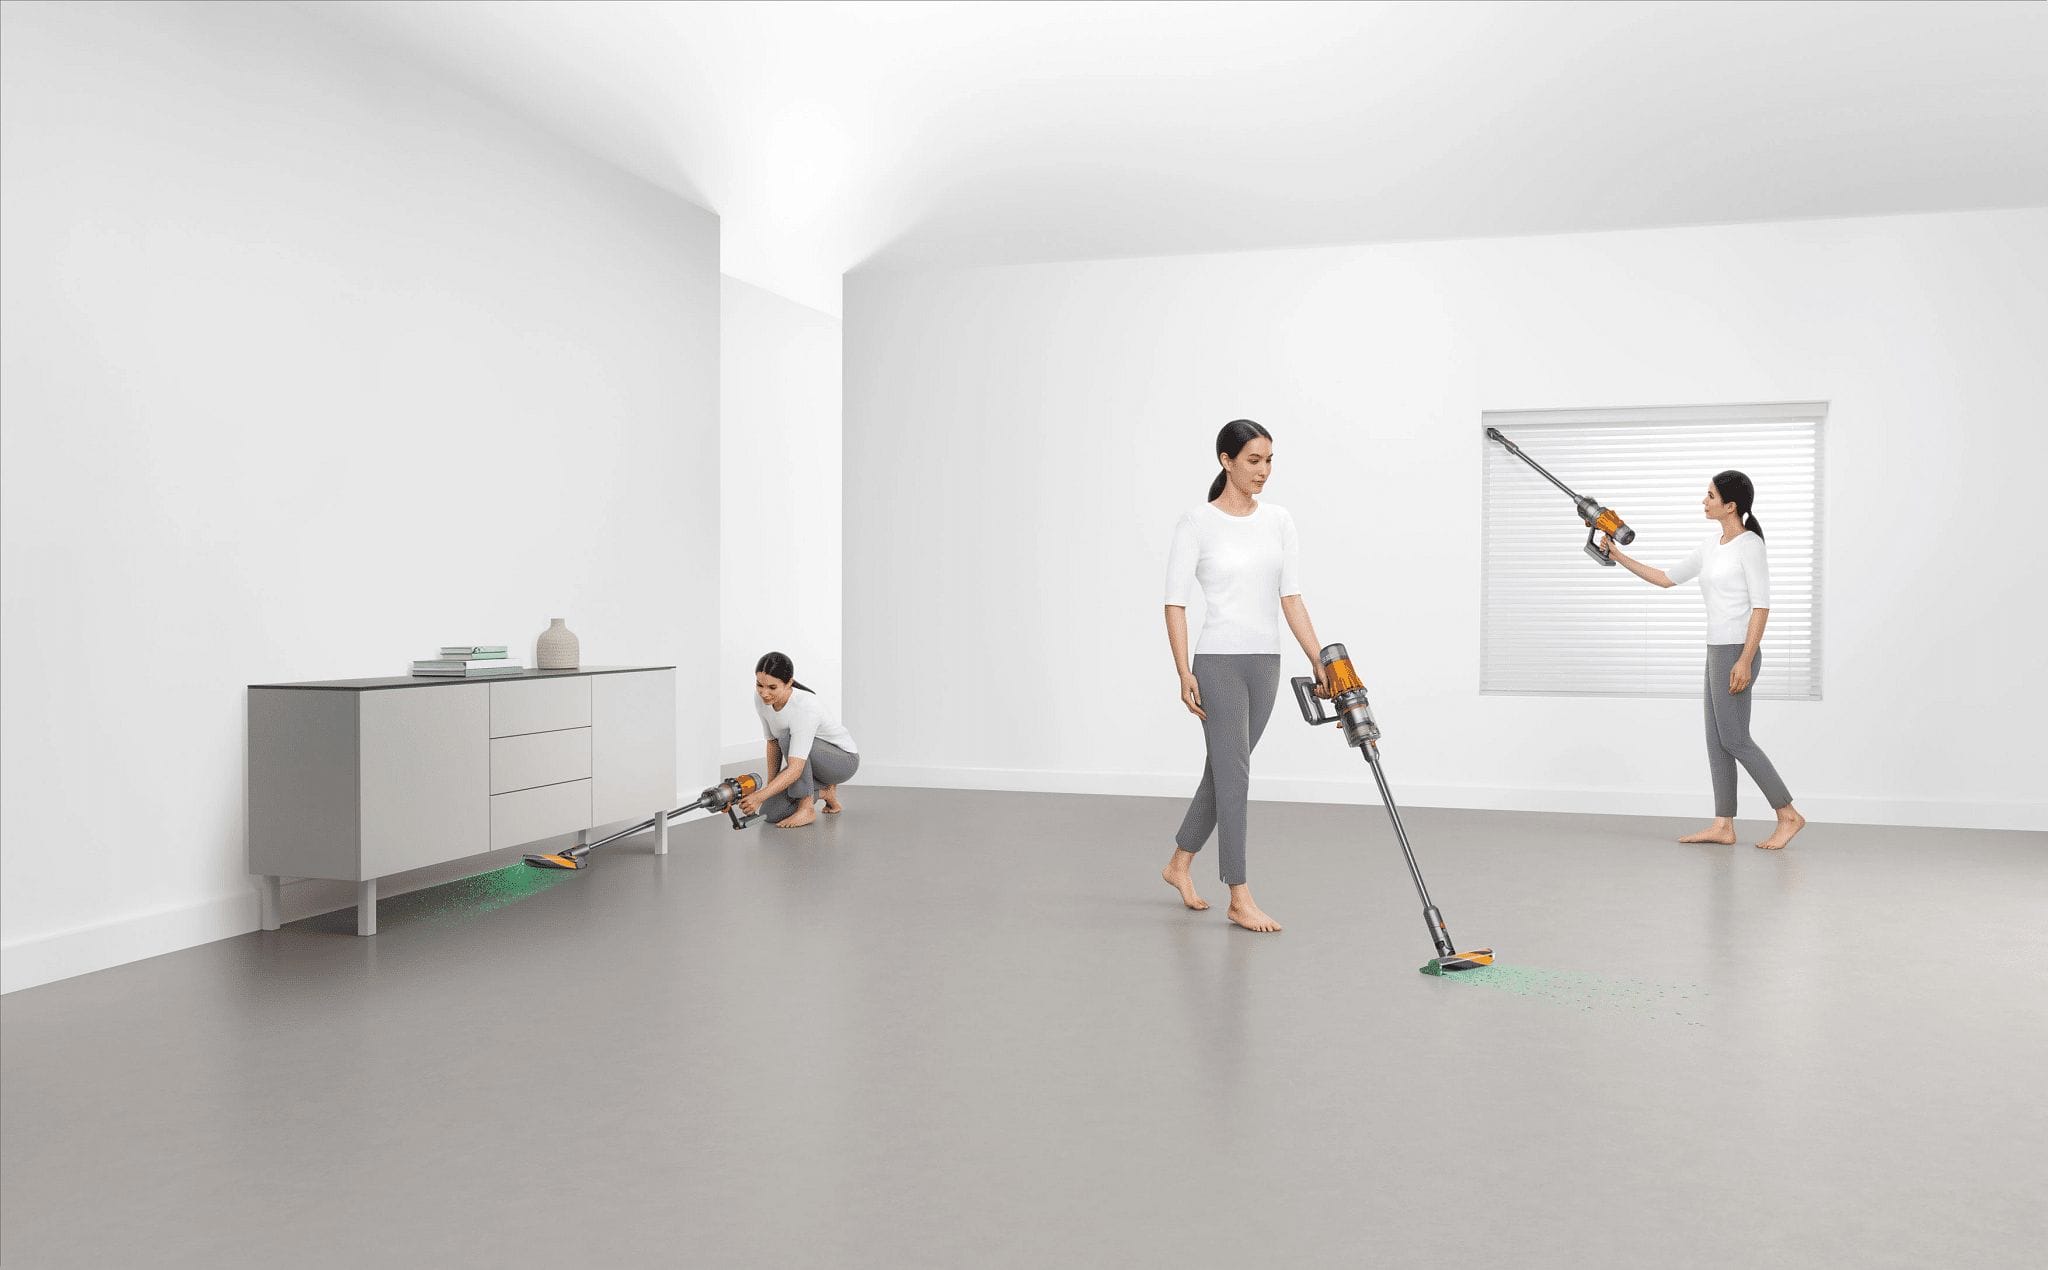 Dyson V12 Detect Slim Review in 2023: I've Never Owned a Vacuum